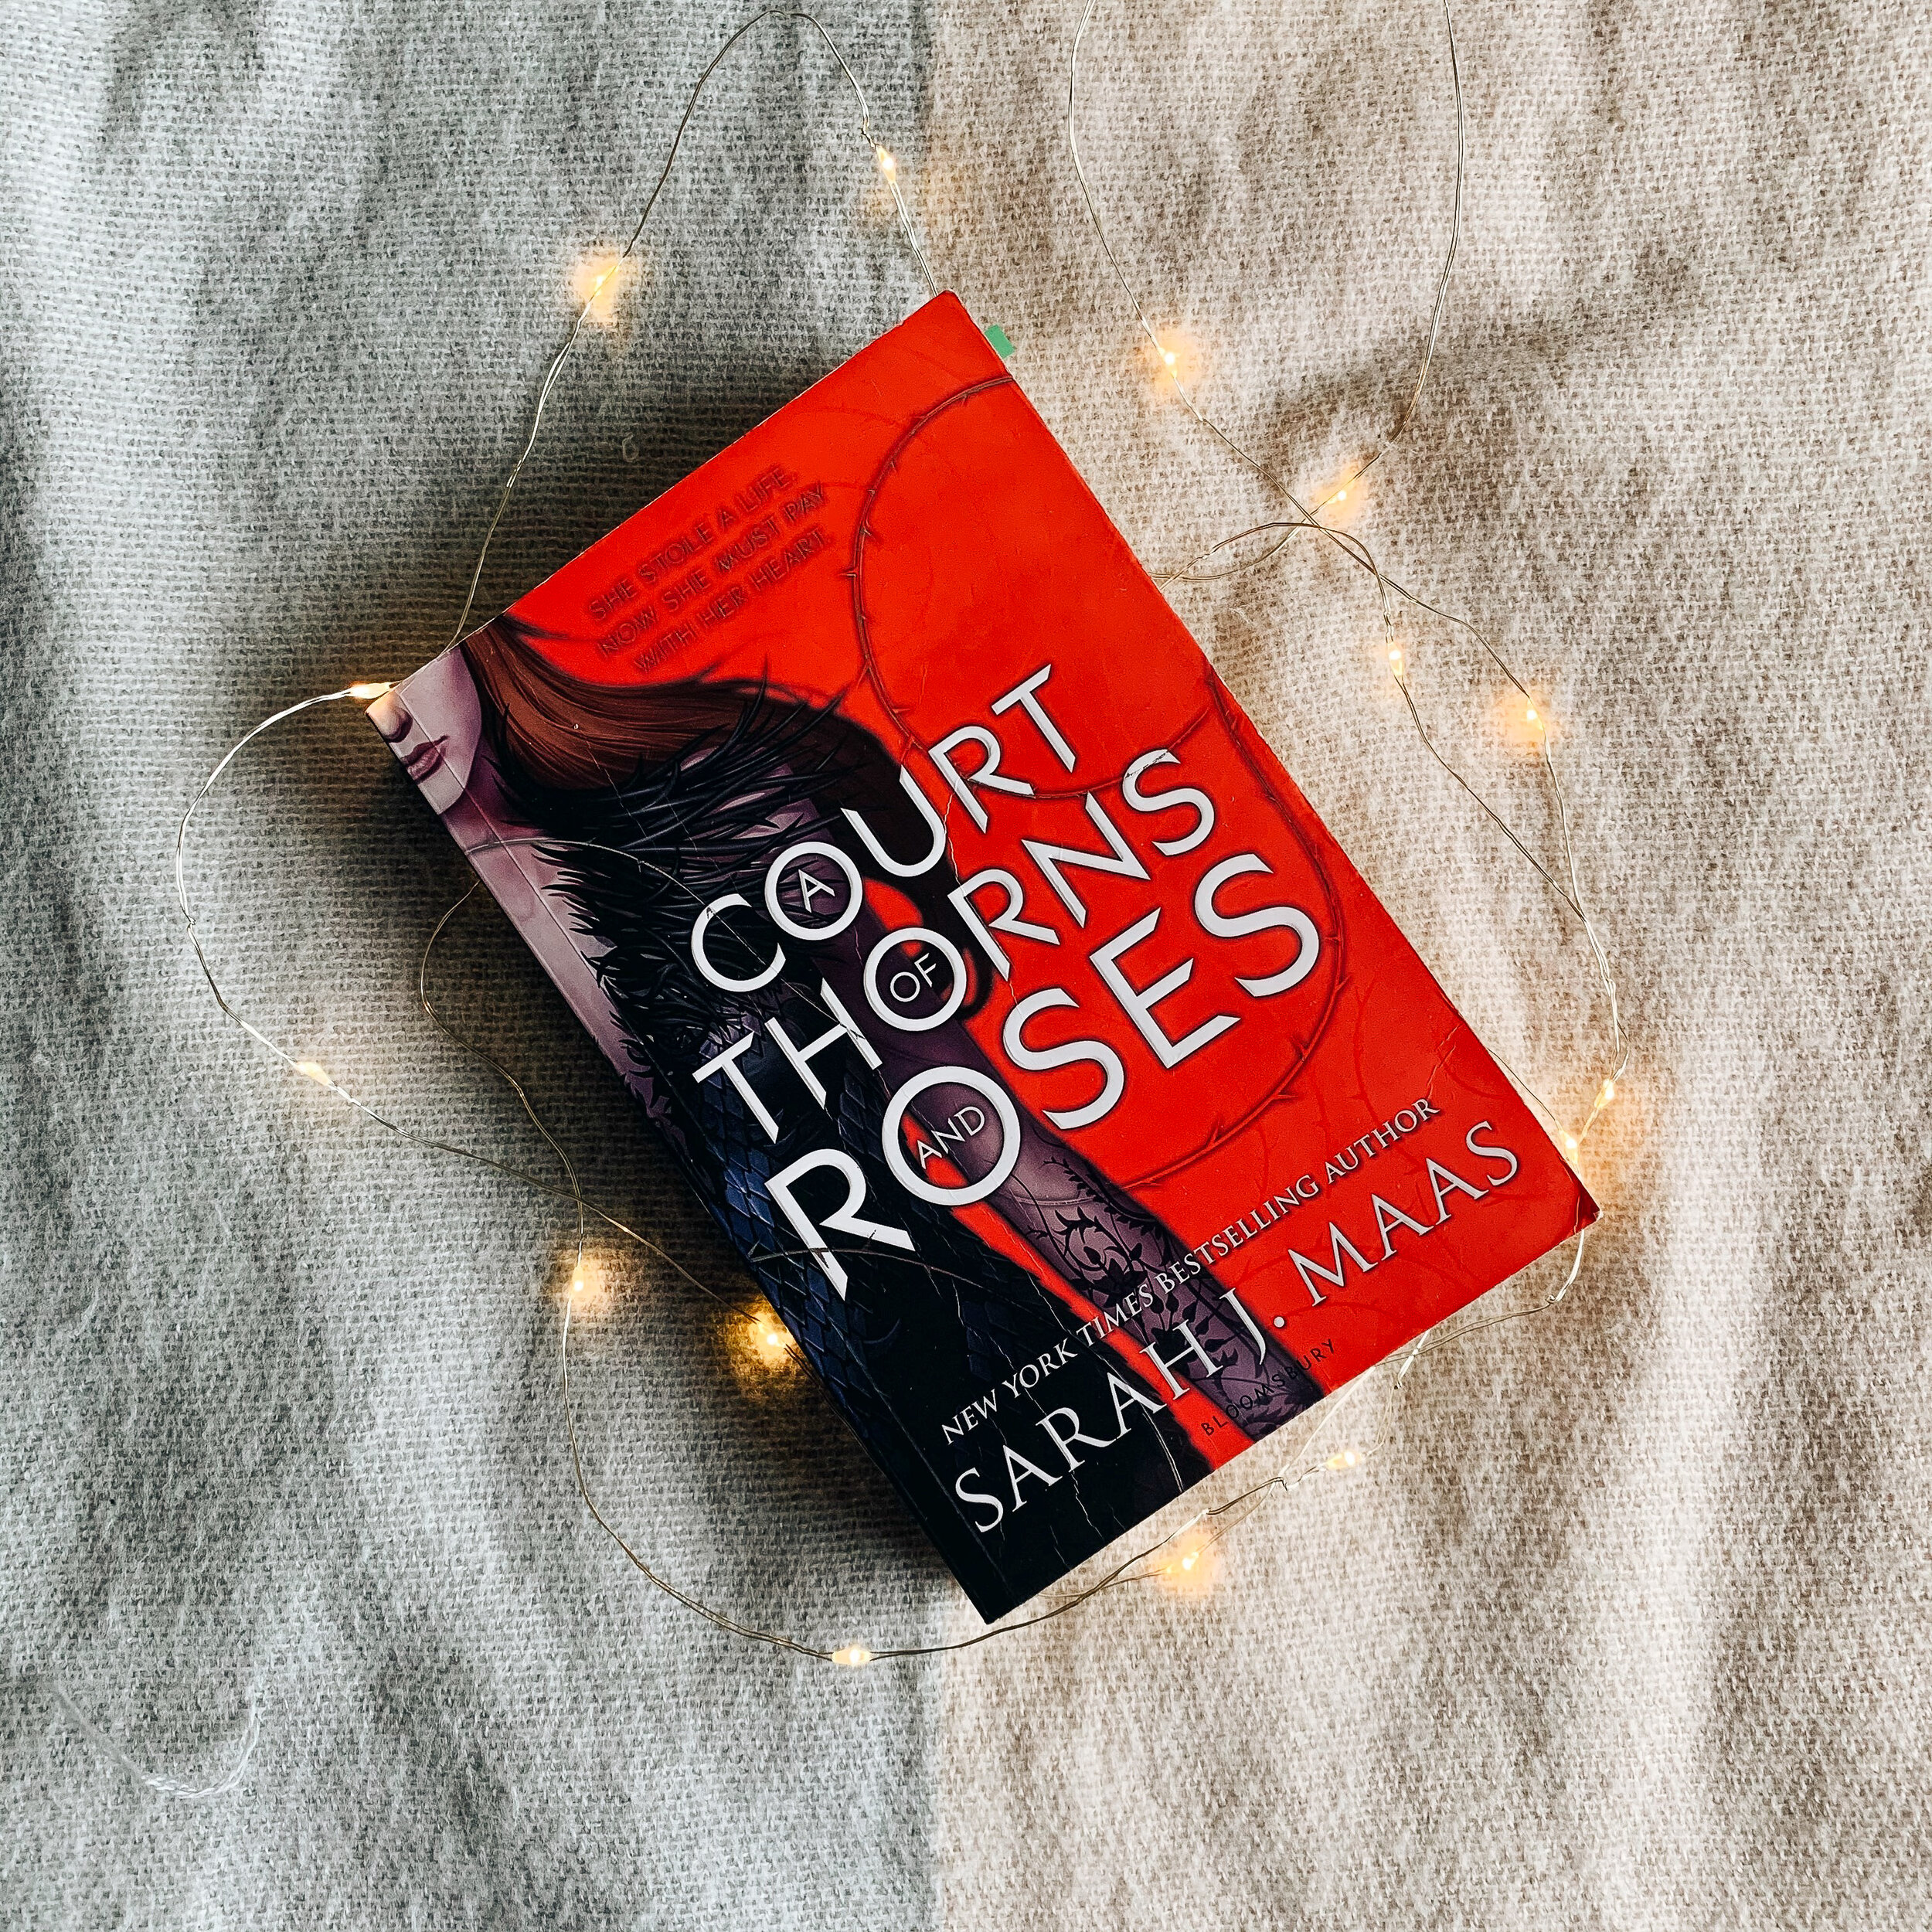  A Court of Thorns and Roses (A Court of Thorns and